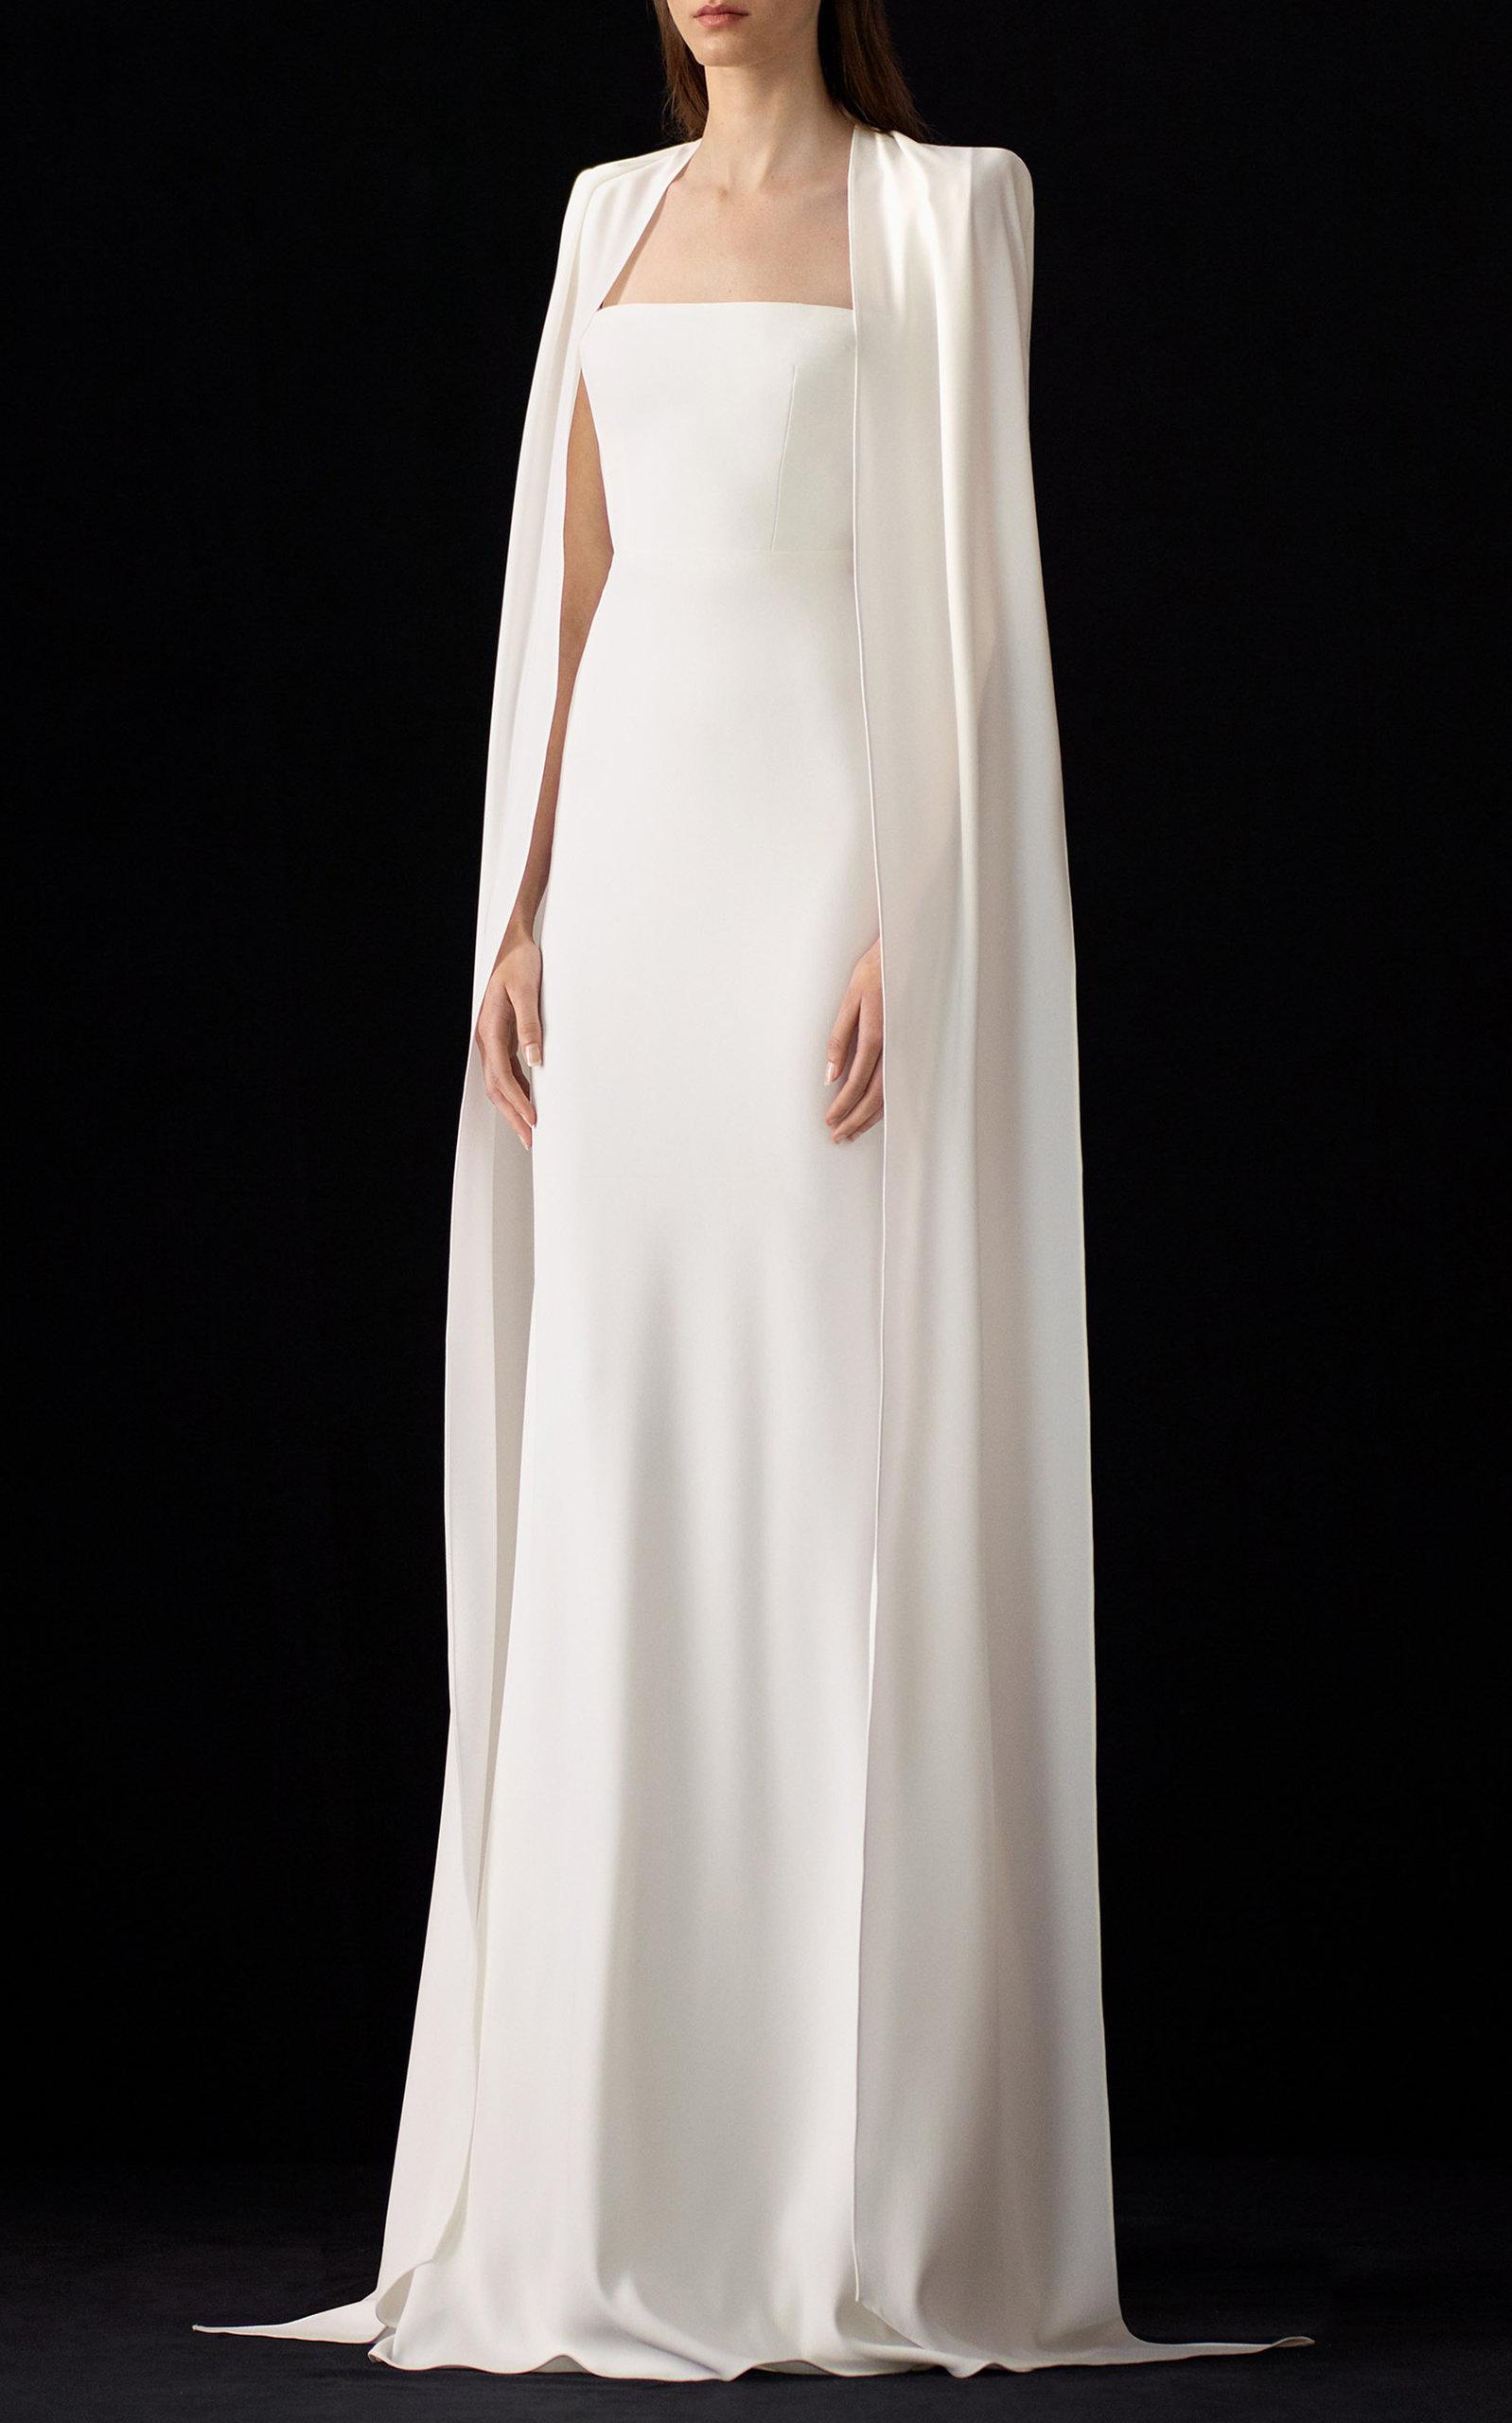 Alex Perry Vance Cape-effect Structured ...